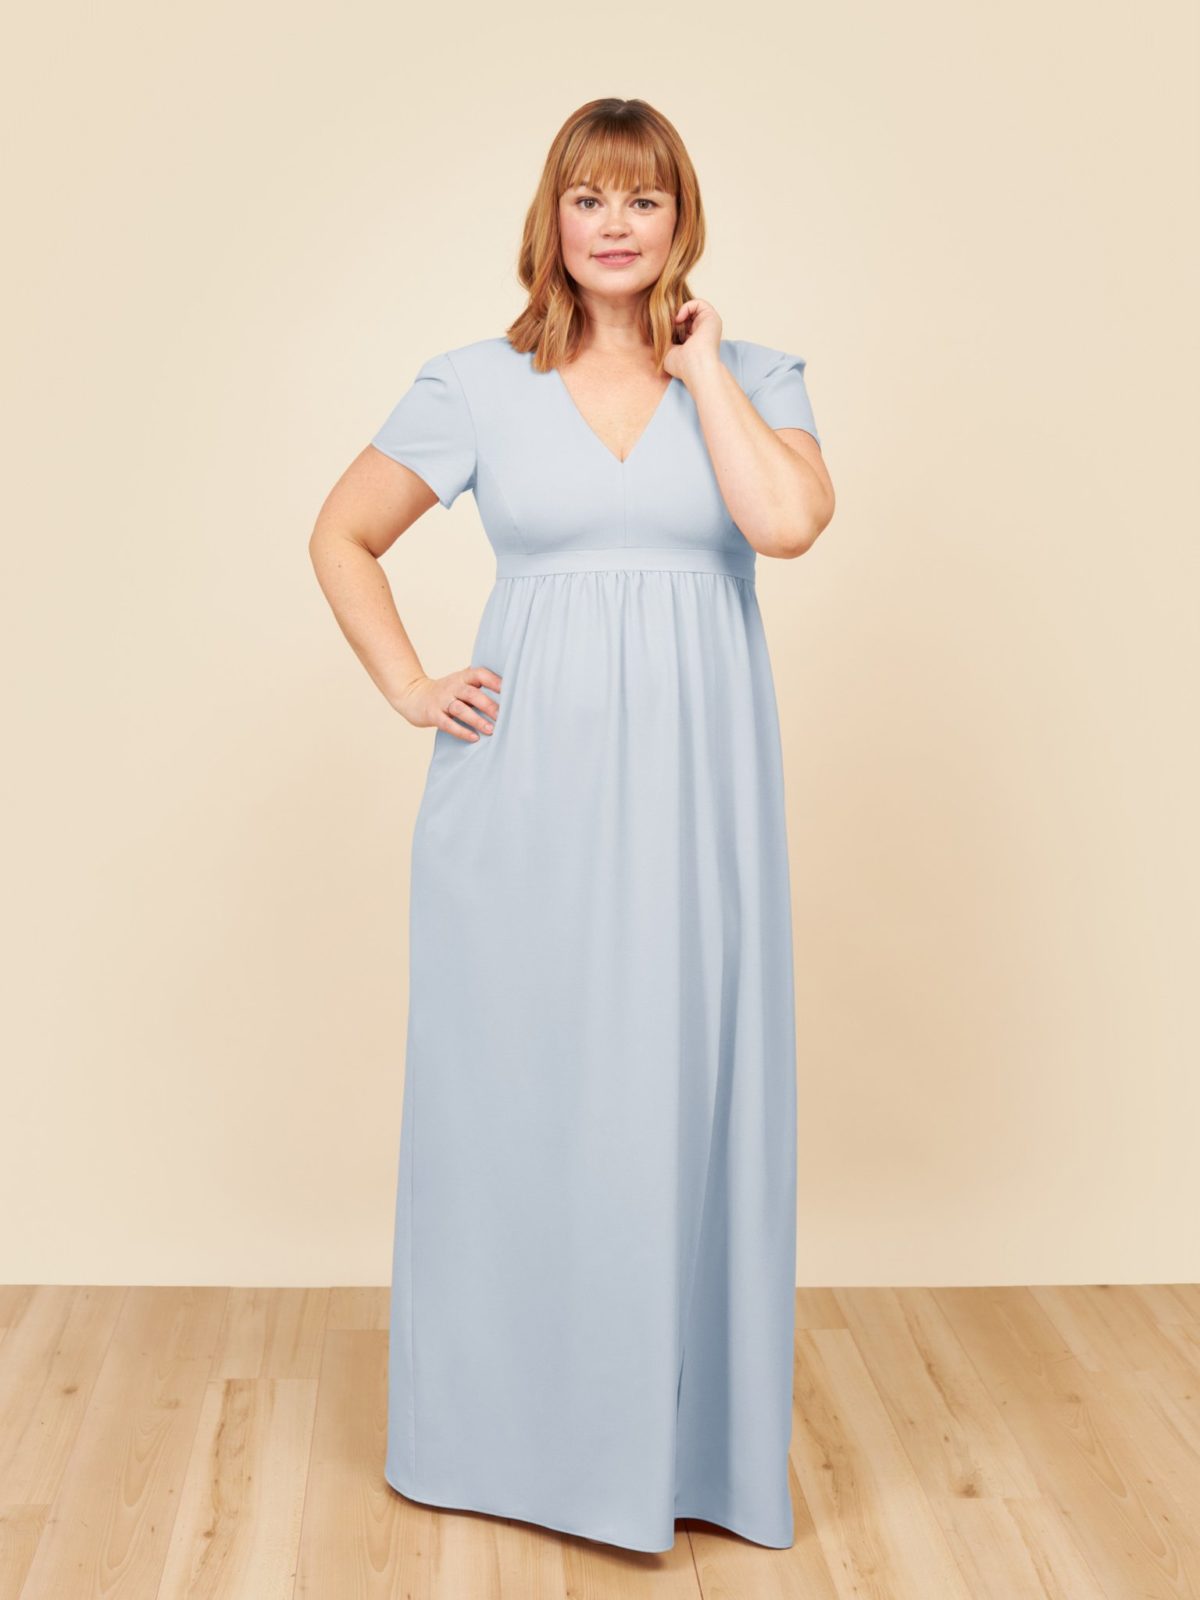 Light blue bridesmaid dress with sleeves perfect for a spring wedding